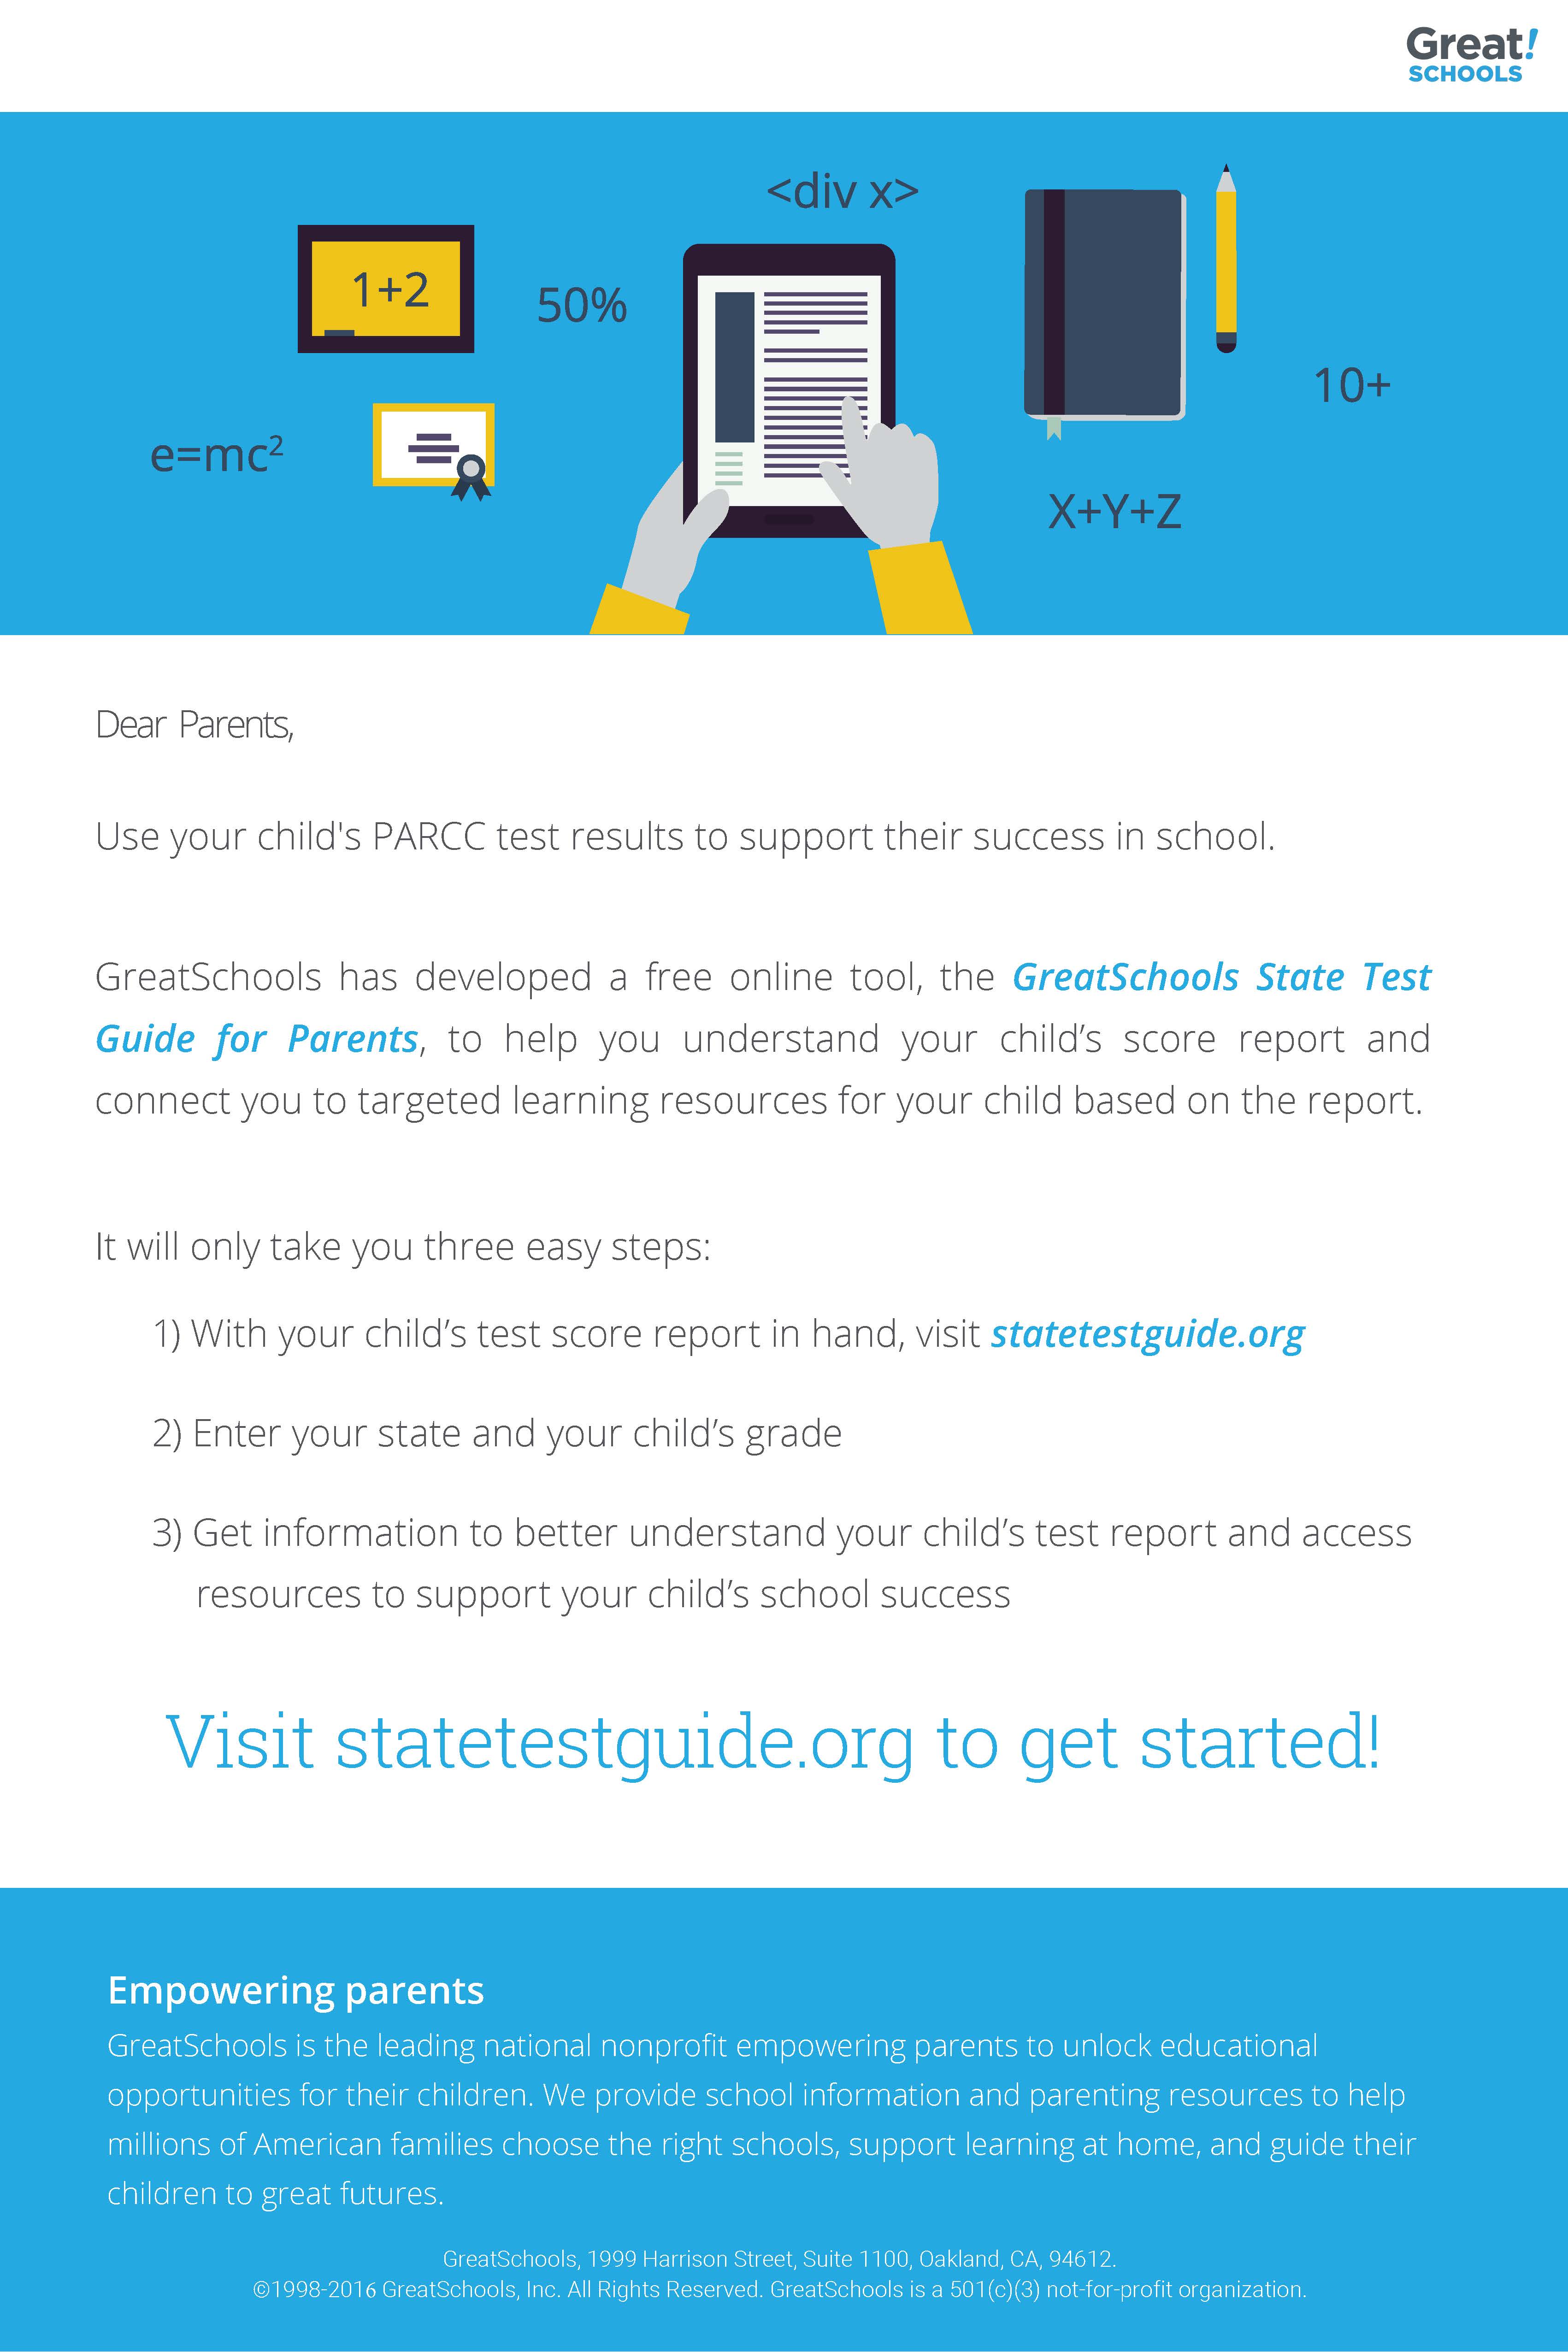 How can parents access their child's school grades?